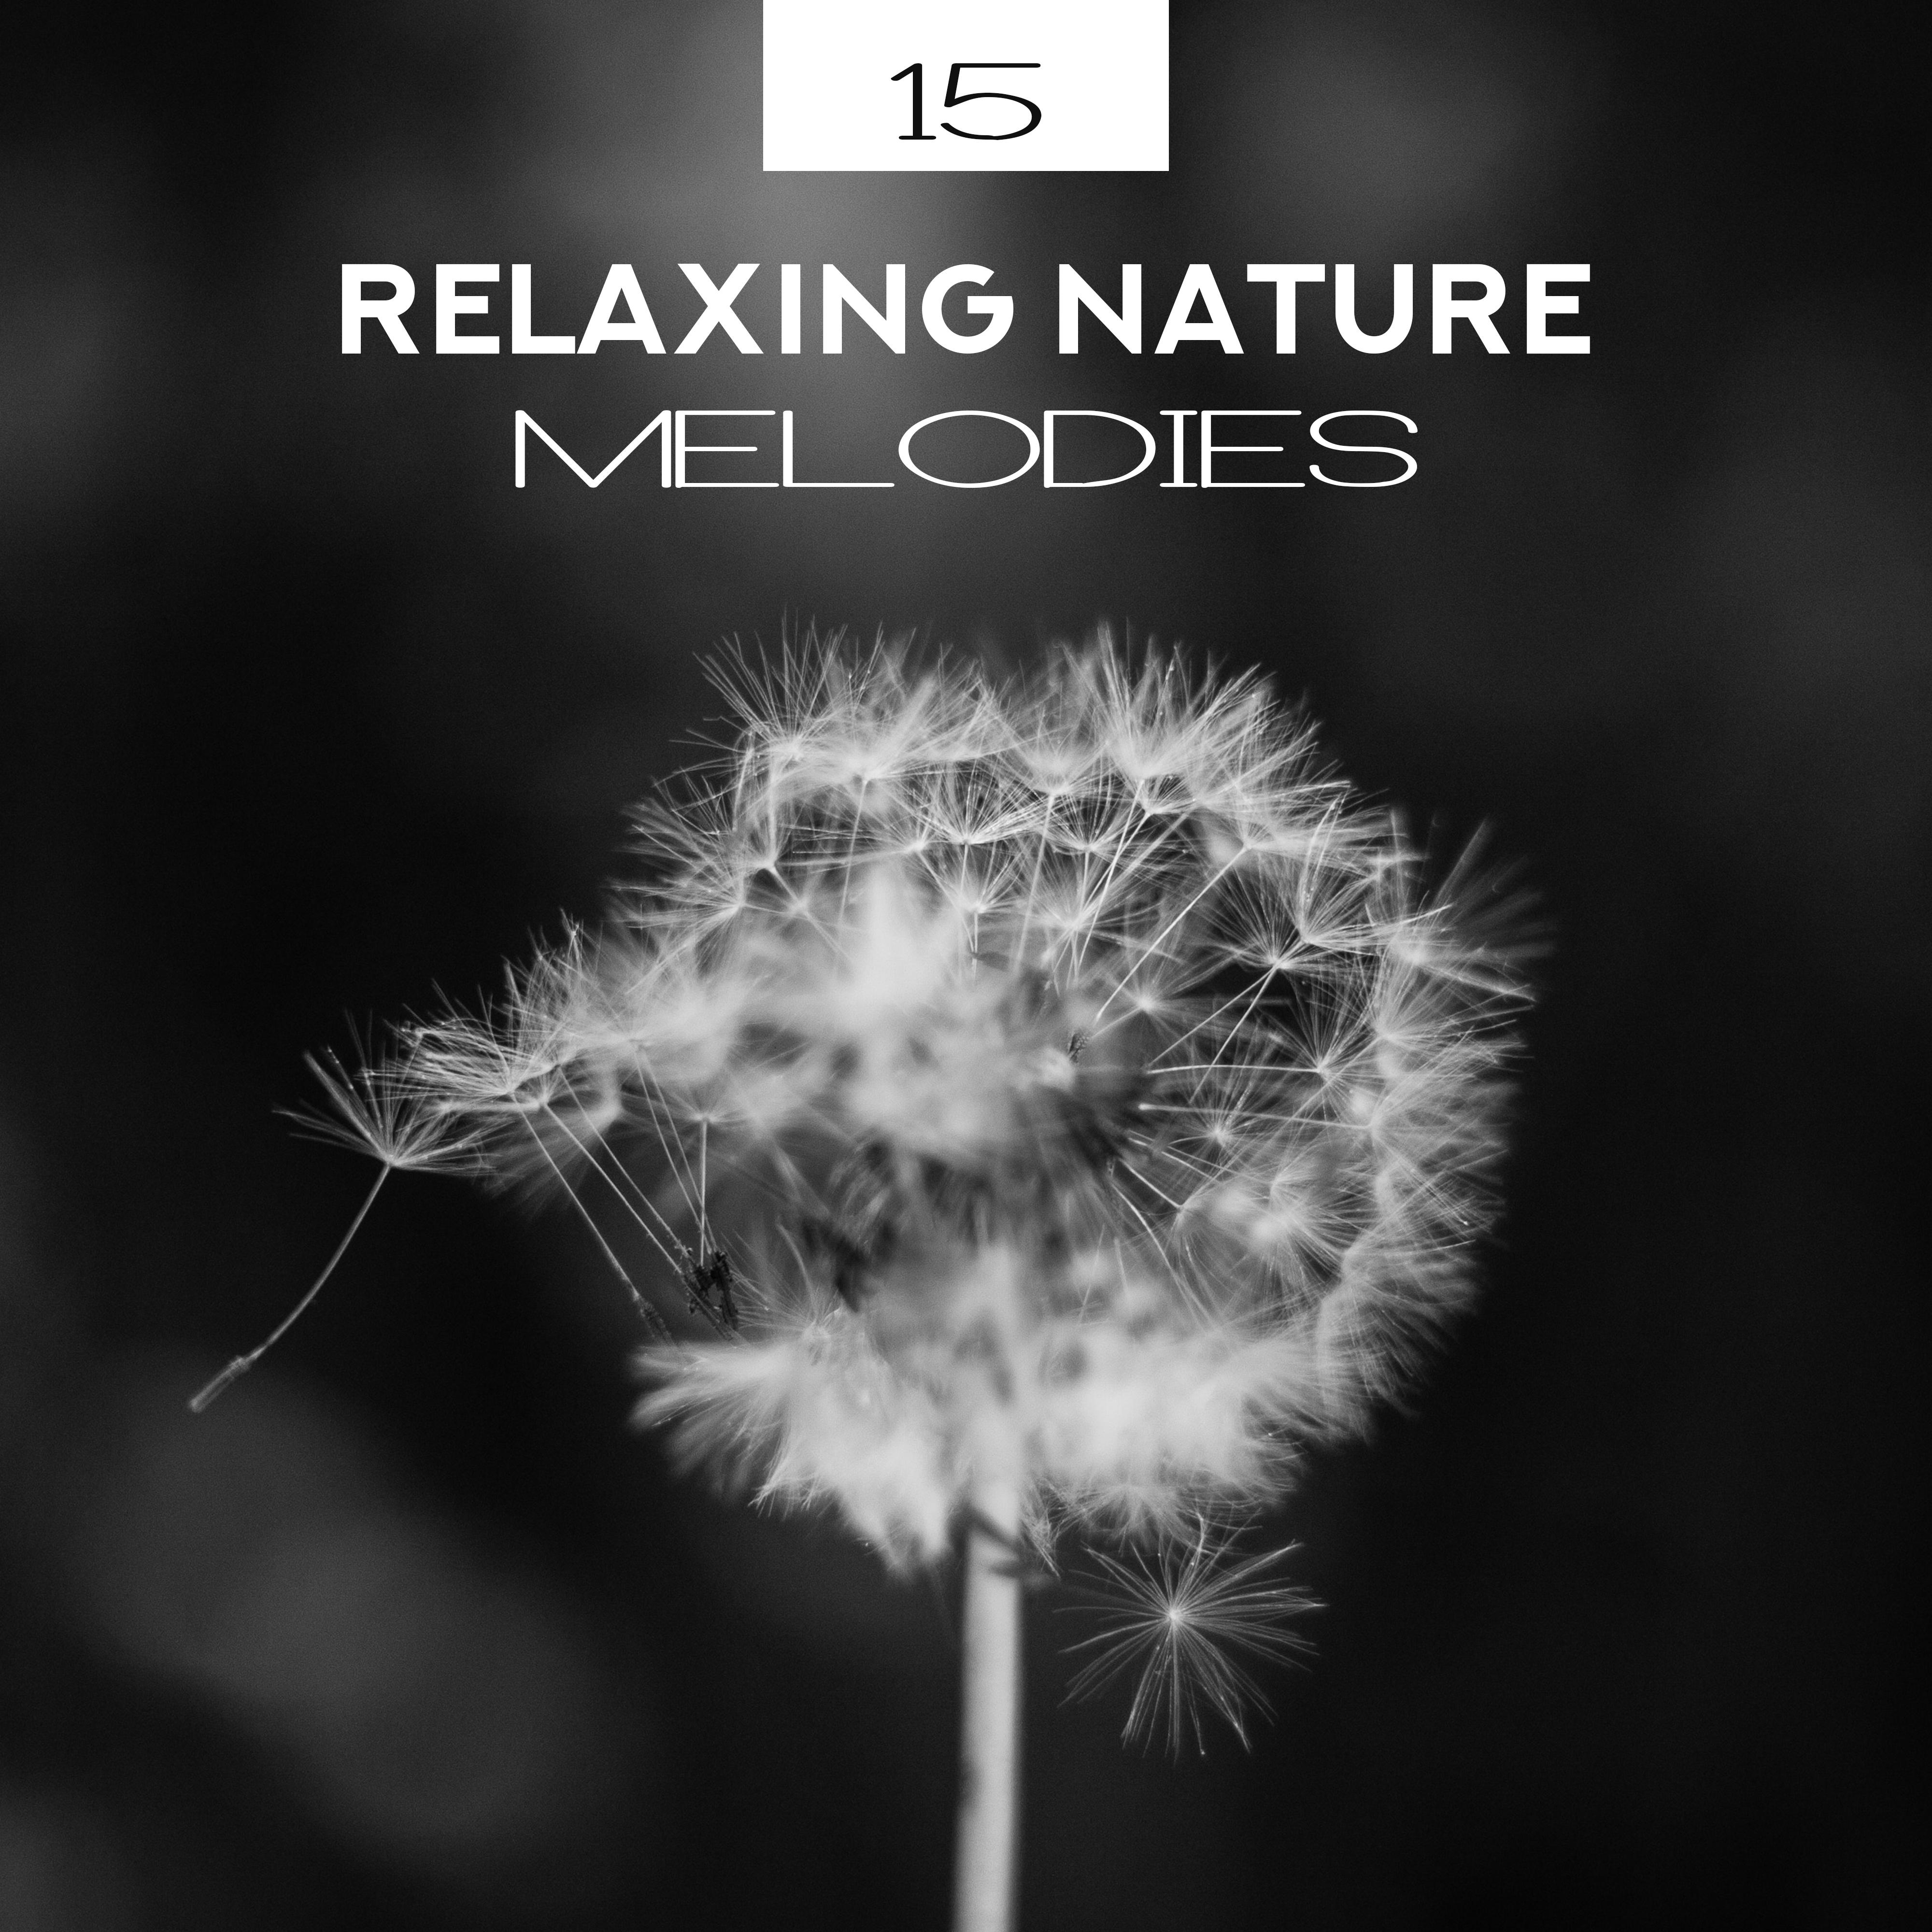 15 Relaxing Nature Melodies